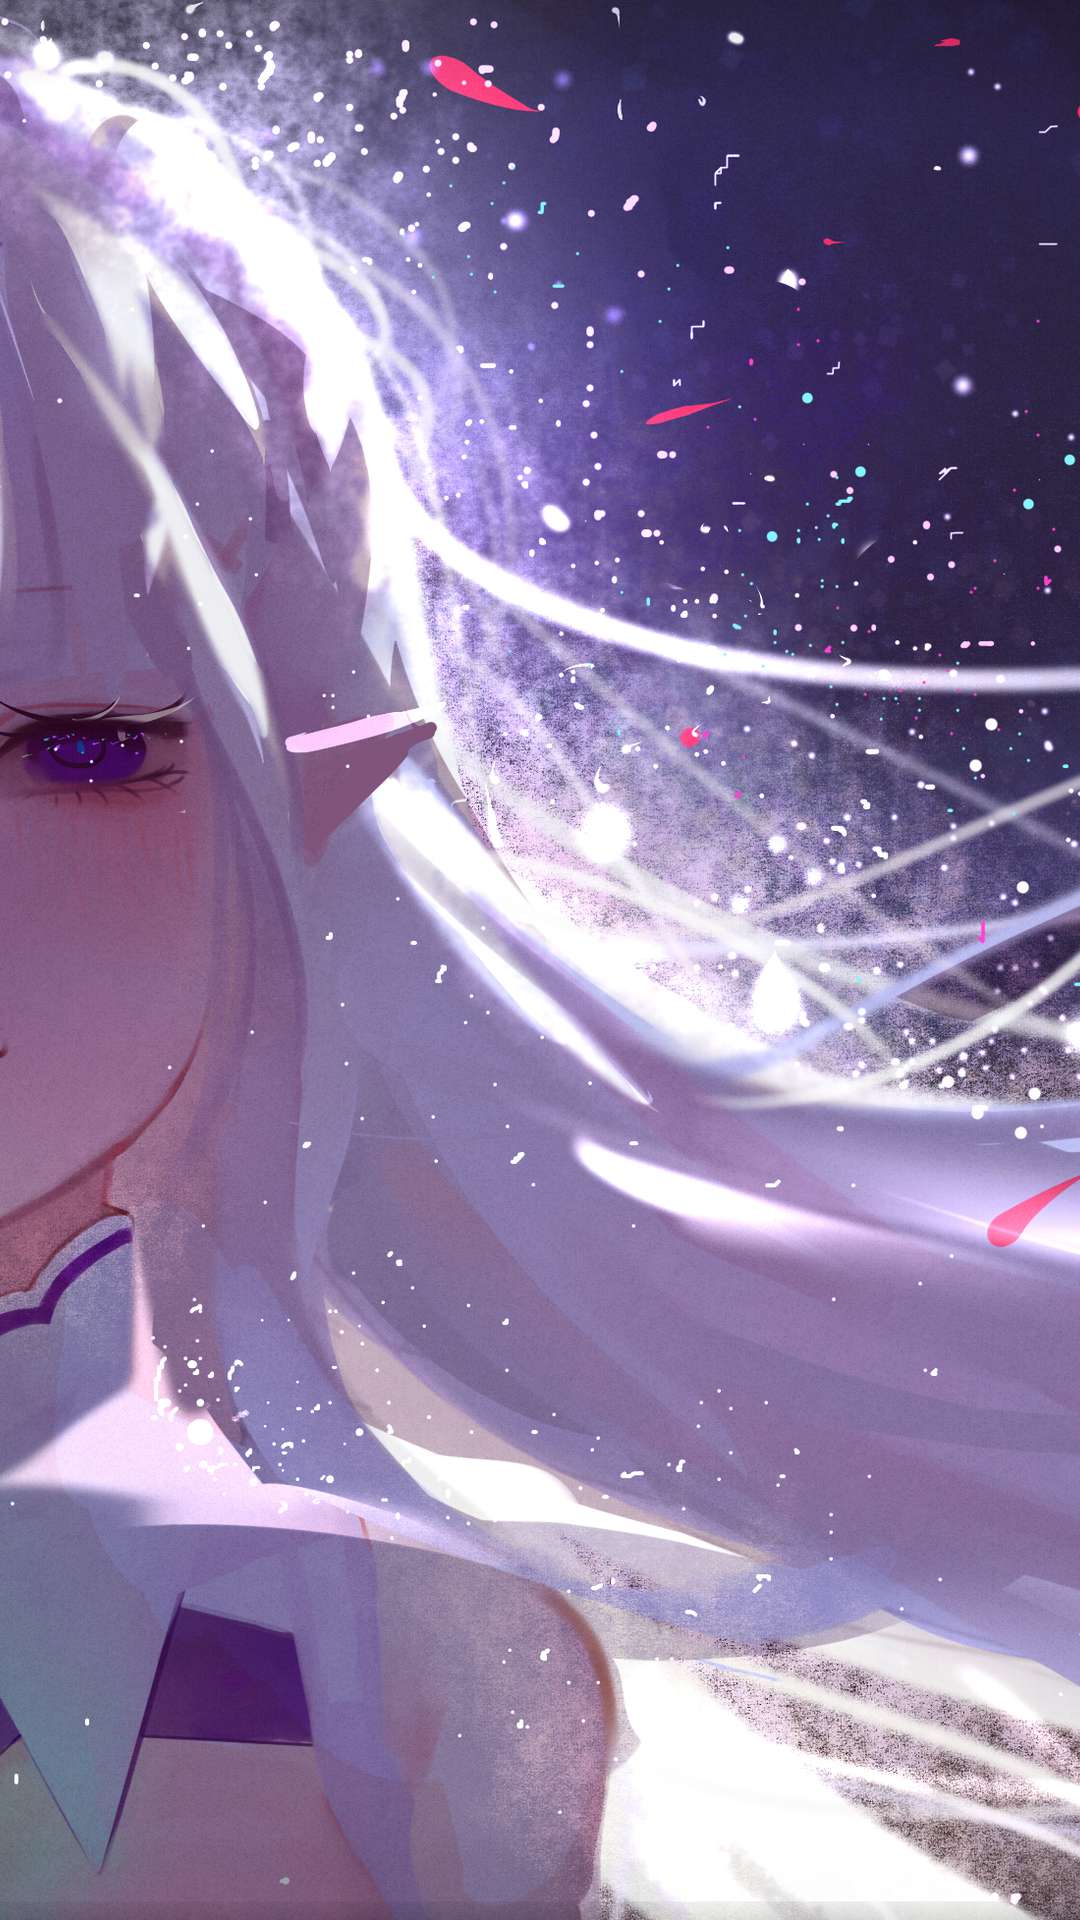 Re:ZERO -Starting Life in Another World - Emilia 2K wallpaper download